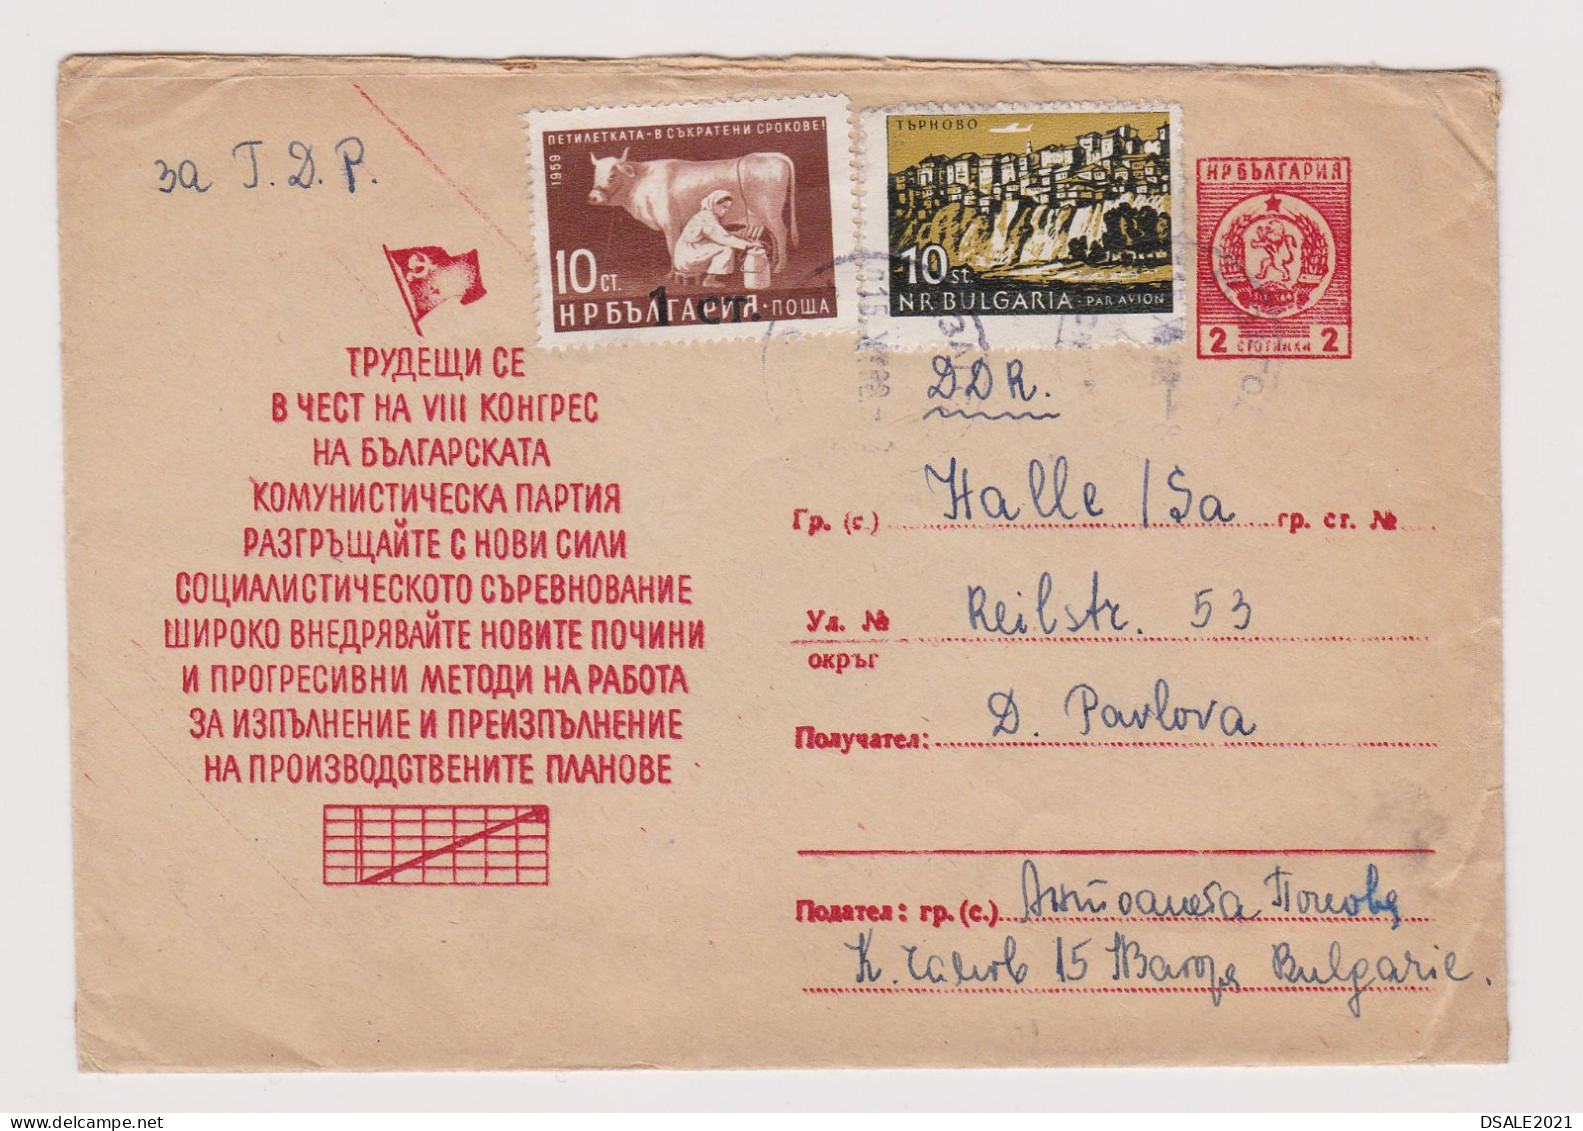 Bulgaria Bulgarie Bulgarien 1962 Ganzsachen, Entier, Stationery Cover, Communist Slogan, Topic Stamps To DDR (66241) - Briefe